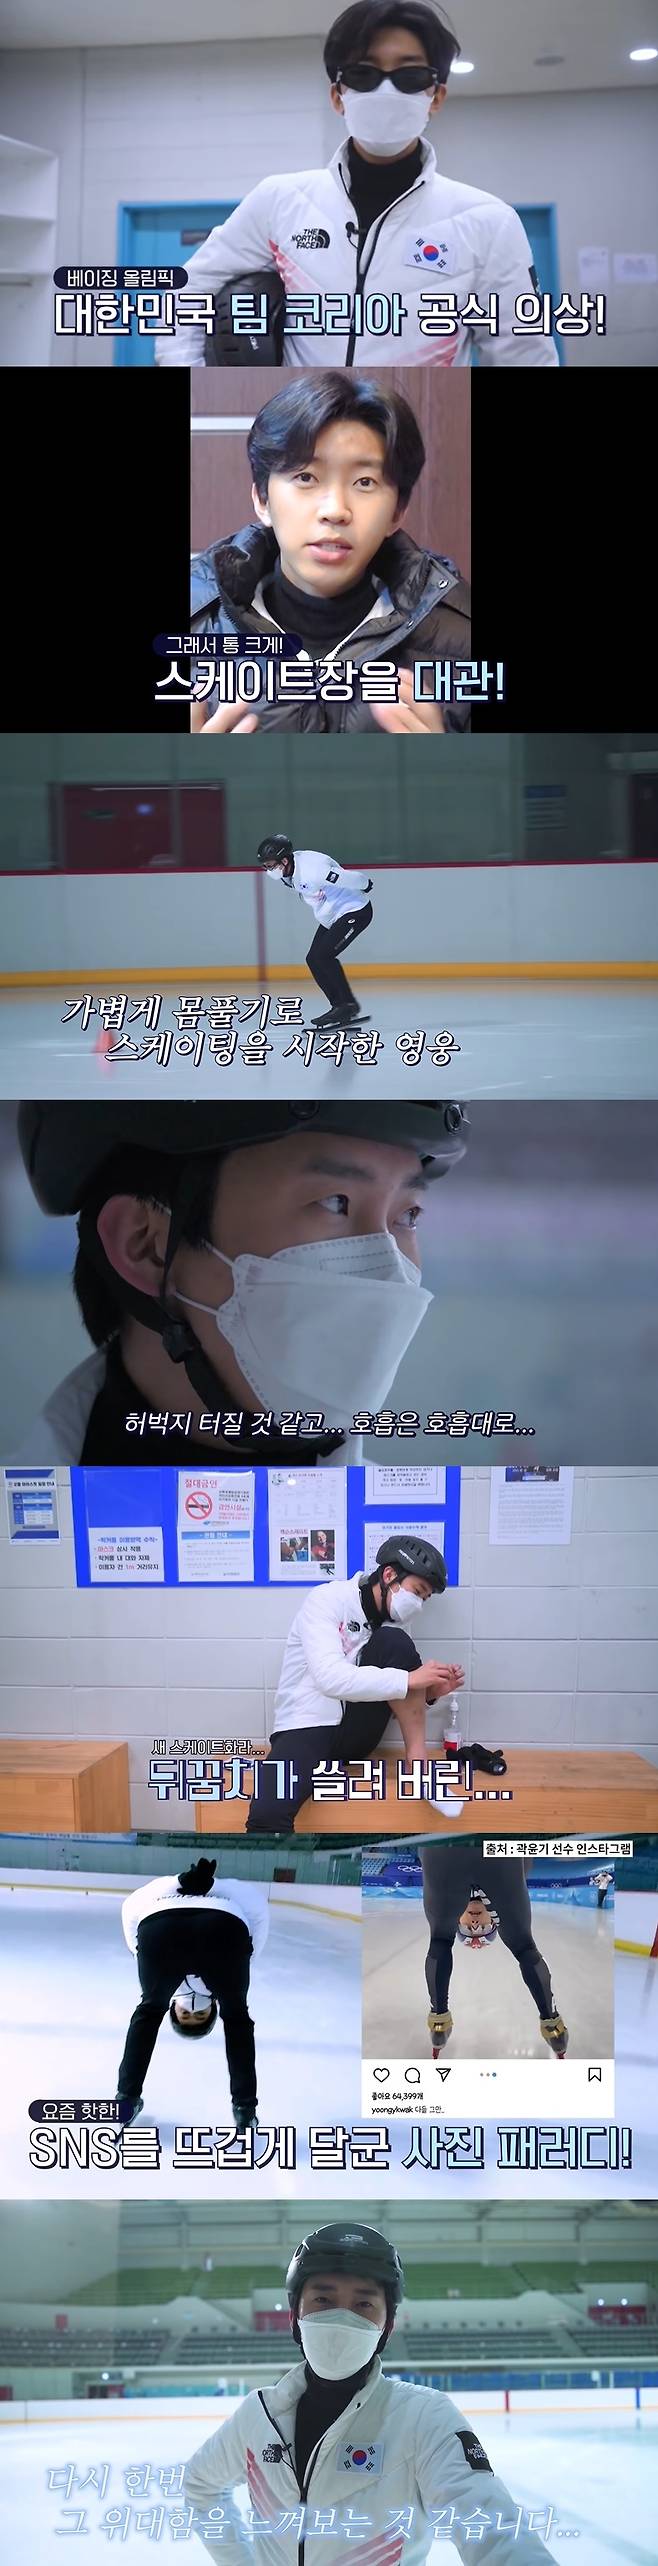 Lim Young-woong has even offered a skatetrack to reveal his passion for short track.On March 4, Lim Young-woongs official YouTube channel Lim Young-woong posted a video titled Short Track V-Log.In the video, Lim Young-woong appeared in the official costume of the Beijing Olympic South Korea team purchased directly from the department store.Lim Young-woong said, I like winter sports and I go to the skating rink skiing once, but skating is so fun.I was a ice skating rink in the past, but I recently went to the ice rink and it was very fun, he said. I wanted to upload you skating during the Olympics, but it was not easy to get permission to shoot.Lim Young-woong, who has been involved in skating rinks for video shoots, said, If you treat them, you should wear personal skates.I did not know that I would buy skate shoes so far. Lim Young-woong, who arrived at the skating rink, set up a cone to meet the official specifications and then turned a light turn to wear a helmet and relax.(To stick out) and make sure the finish is done, said Lim Young-woong, who was passionate about his first record of 19.26 seconds.Lim Young-woong, who showed a good skating skill, complained about the difficulty of turning the track with his hands on his hands and said, I can not even try again once I have done it.My thighs are likely to burst, my breathing is breathing. Life is accompanied by pain. Even with his heels swept away due to the new skates, Lim Young-woong recently gave a laugh by parodying Kwak Yoon-gy Pose, which had a big topic online.But Lim Young-woong said, Its a great fitness exercise. All South Korea players are great.I feel that greatness once again. Kwak Yoon-gy, who watched the video, responded in a comment, I will let you know as an attribute.